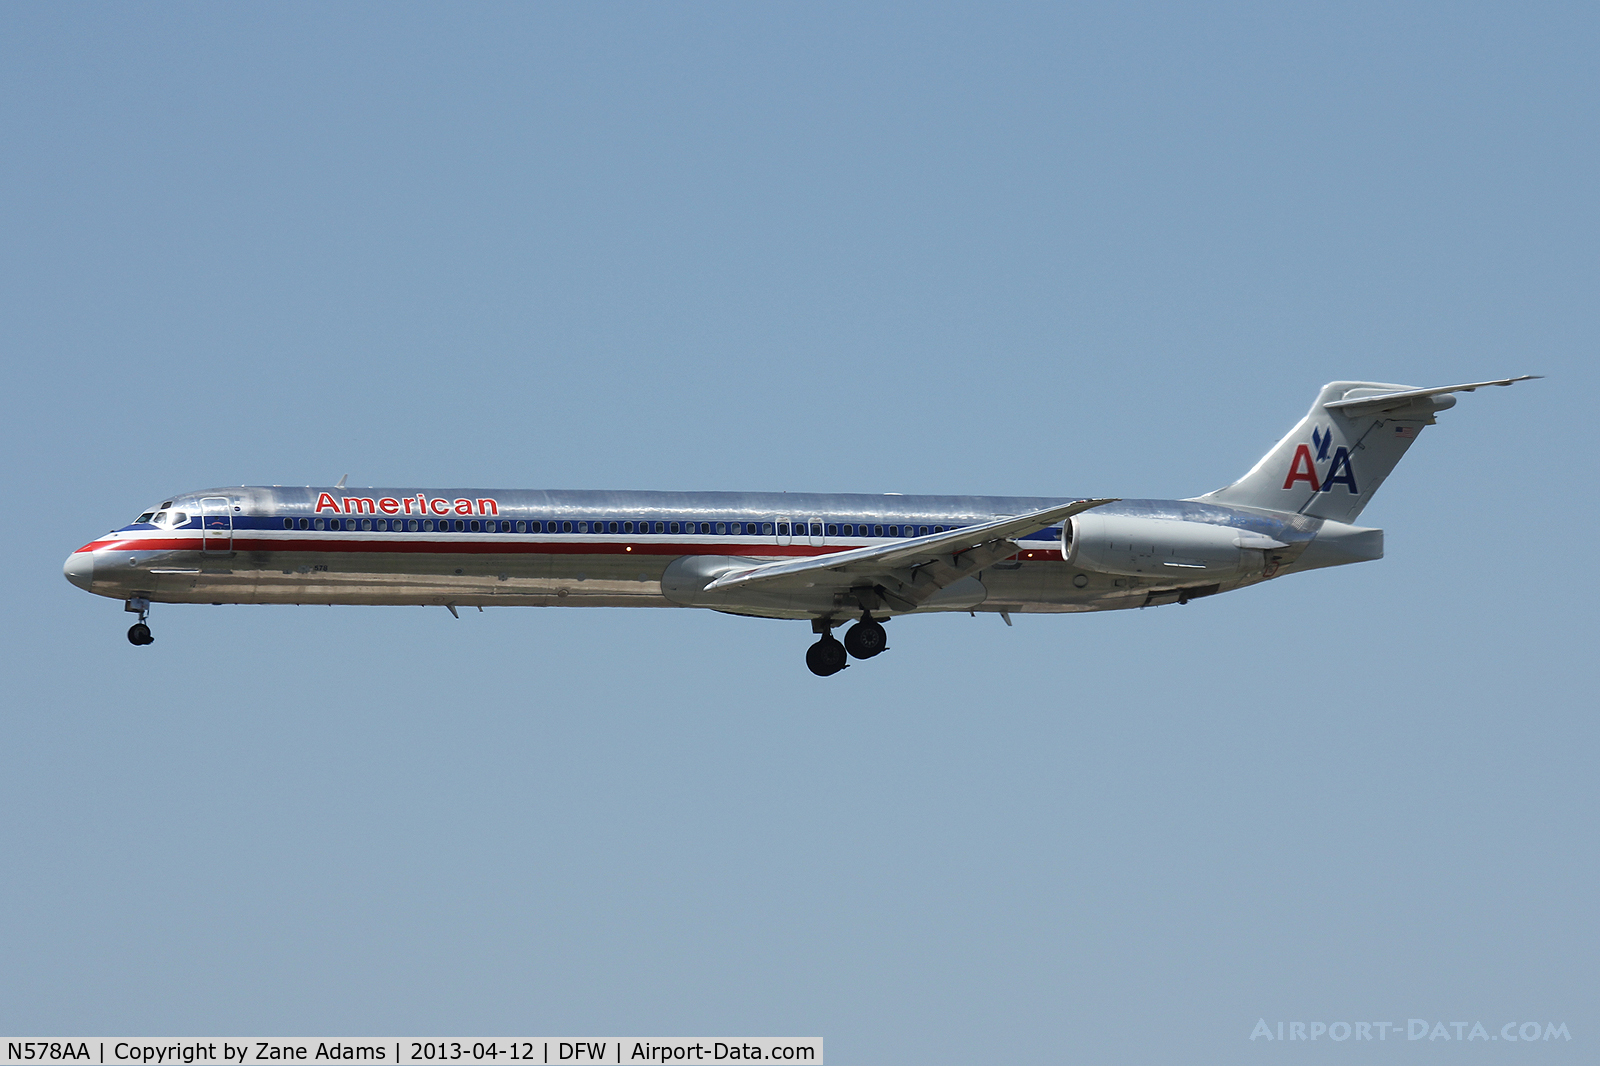 N578AA, 1991 McDonnell Douglas MD-82 (DC-9-82) C/N 53155, American Airlines landing at DFW Airport